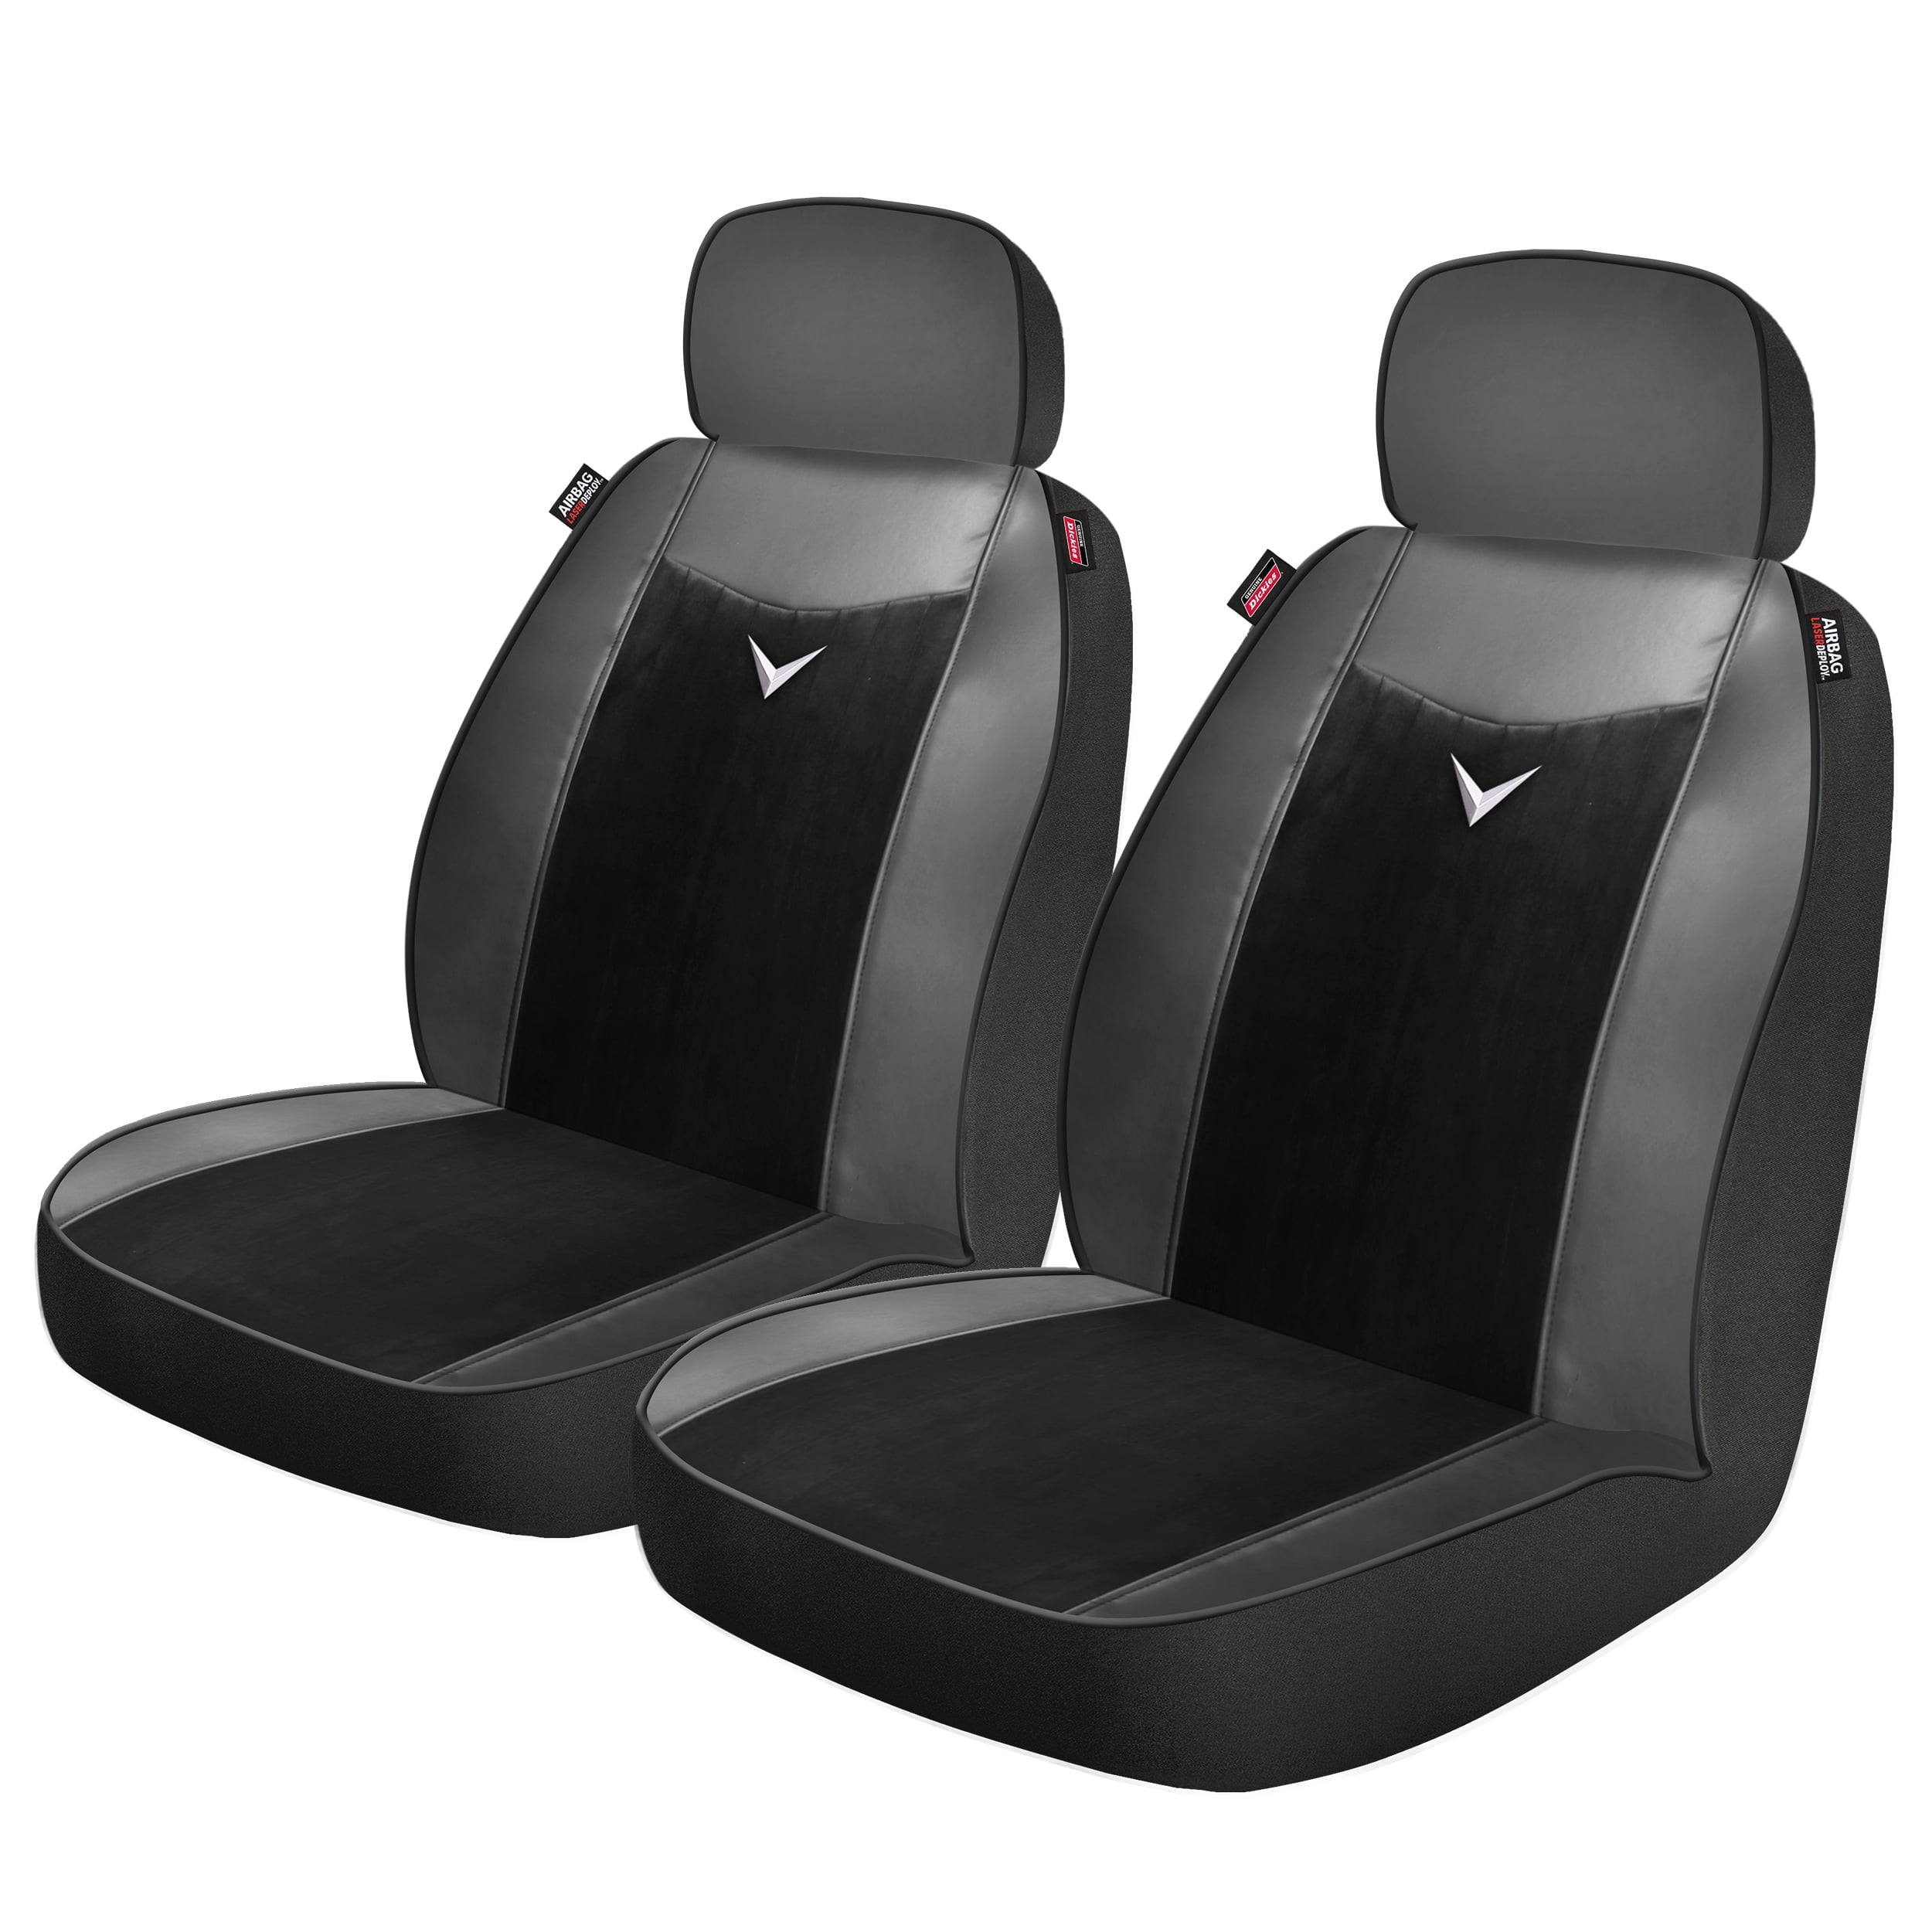 Genuine Dickies Classics 2 Piece Low Back Seat Covers Hornet Black, 40221WDI